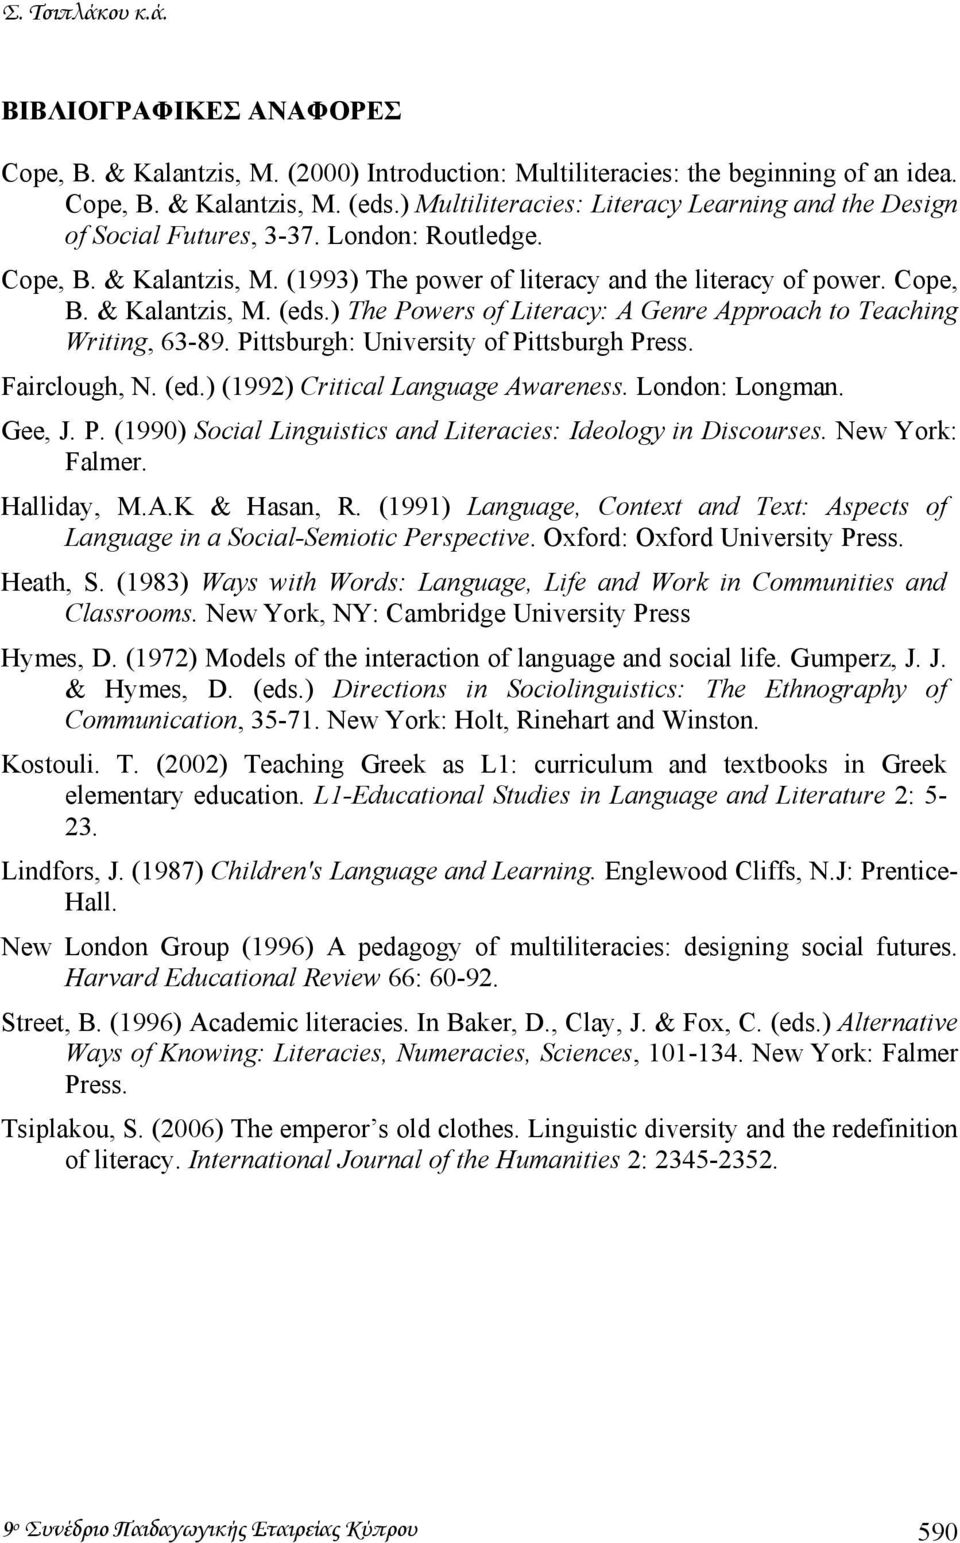 ) The Powers of Literacy: A Genre Approach to Teaching Writing, 63-89. Pittsburgh: University of Pittsburgh Press. Fairclough, N. (ed.) (1992) Critical Language Awareness. London: Longman. Gee, J. P. (1990) Social Linguistics and Literacies: Ideology in Discourses.